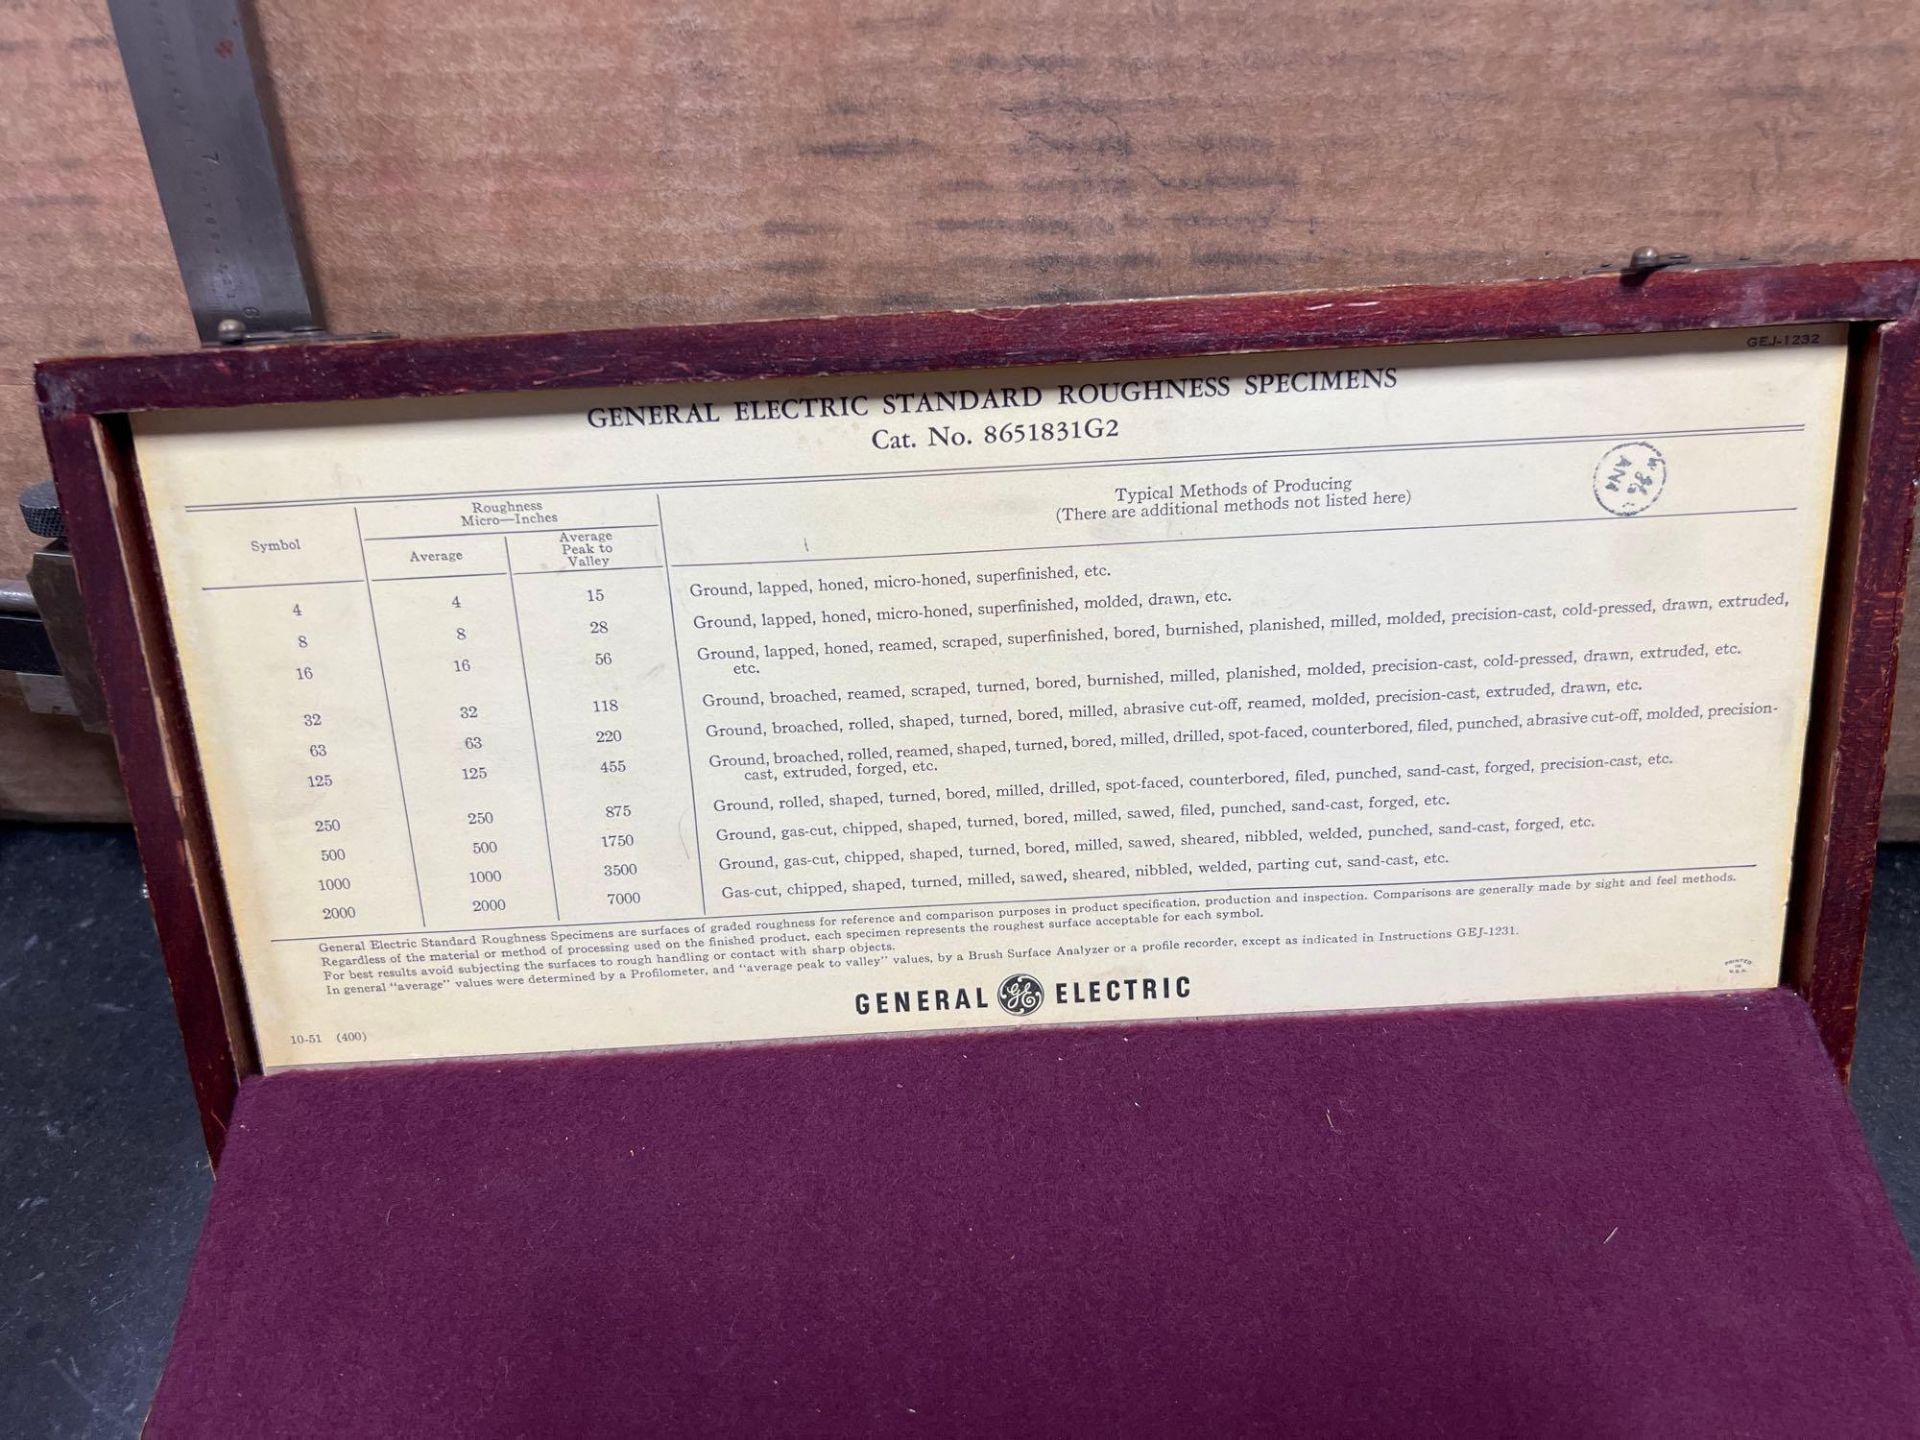 GE General Electric Standard Roughness Specimens Cat. 8651831G2 - Image 3 of 3